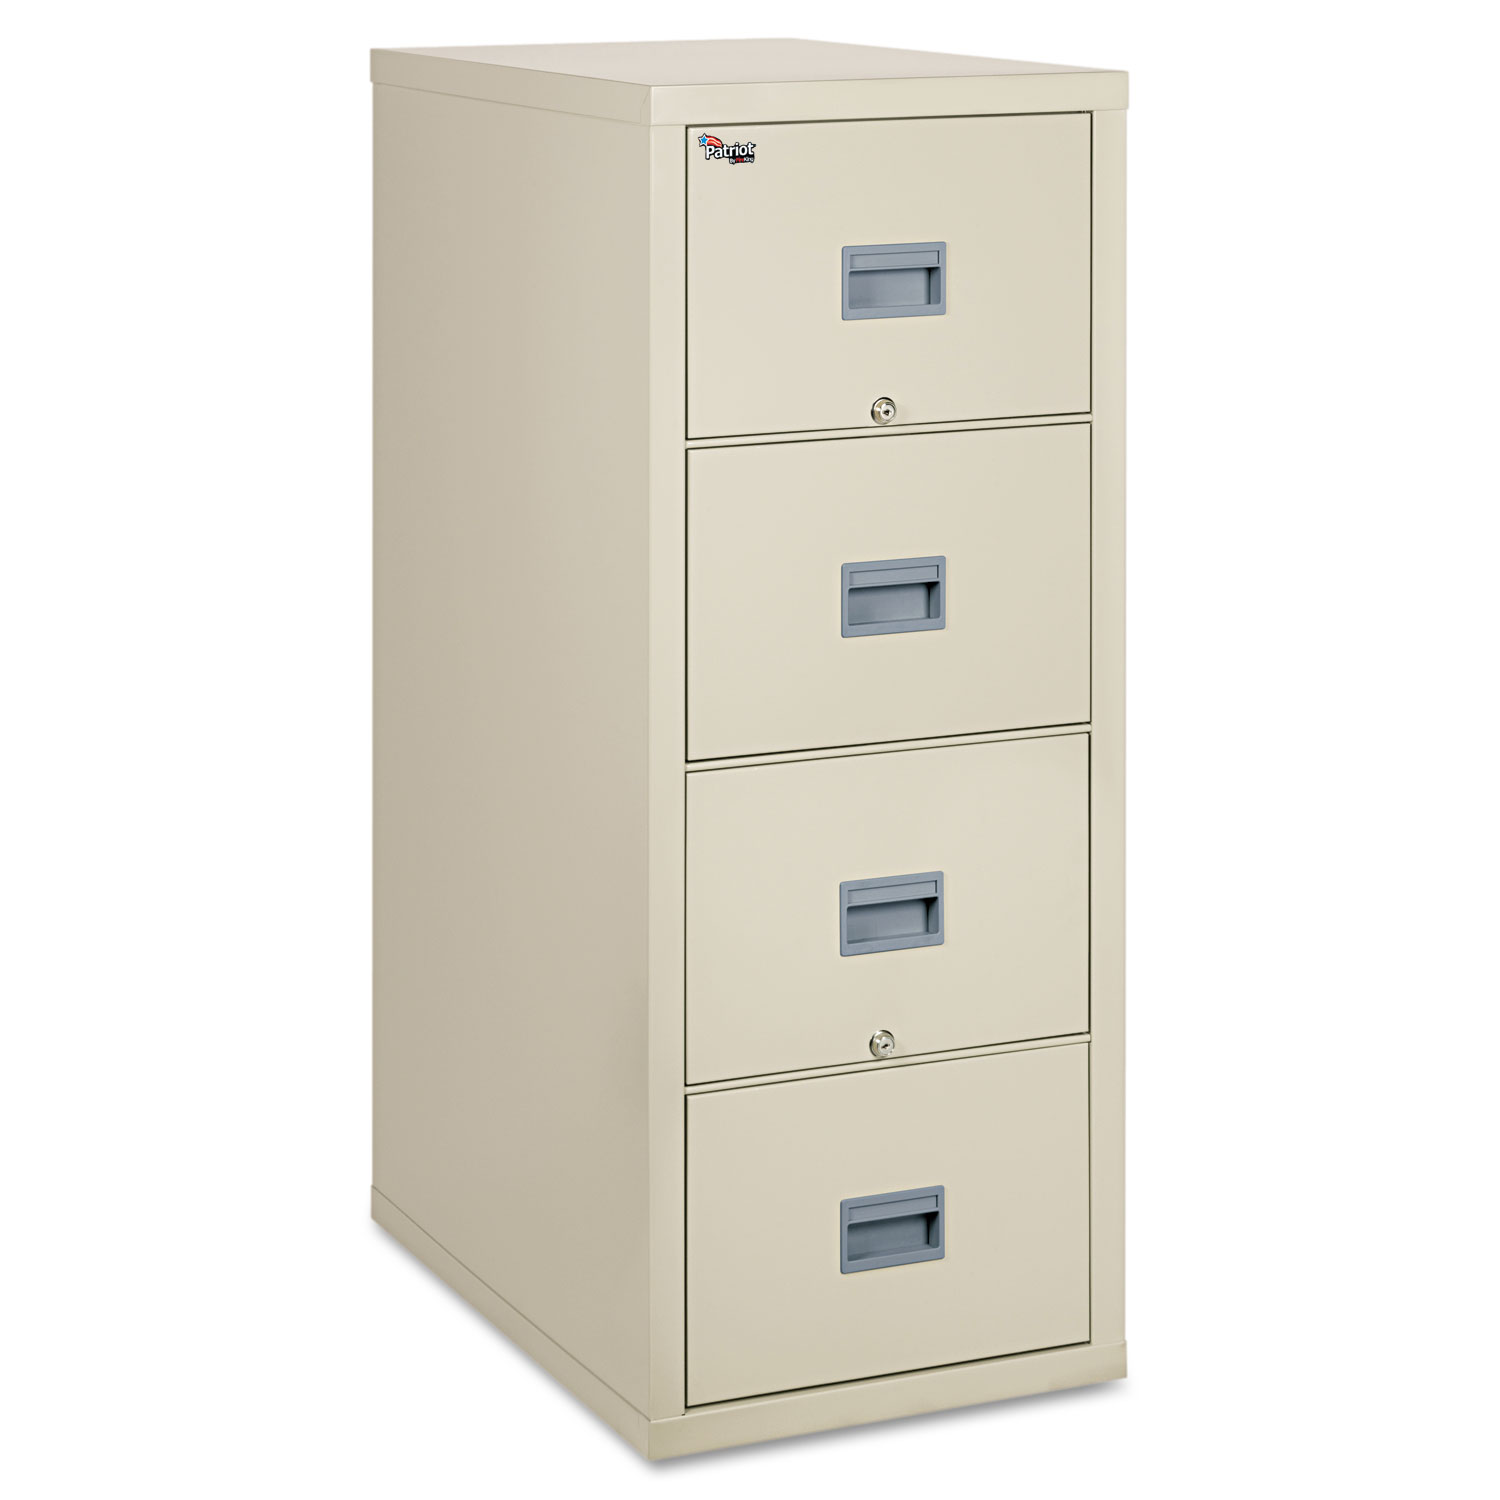 Patriot Insulated Four-Drawer Fire File, 20-3/4w x 31-5/8d x 52-3/4h, Parchment